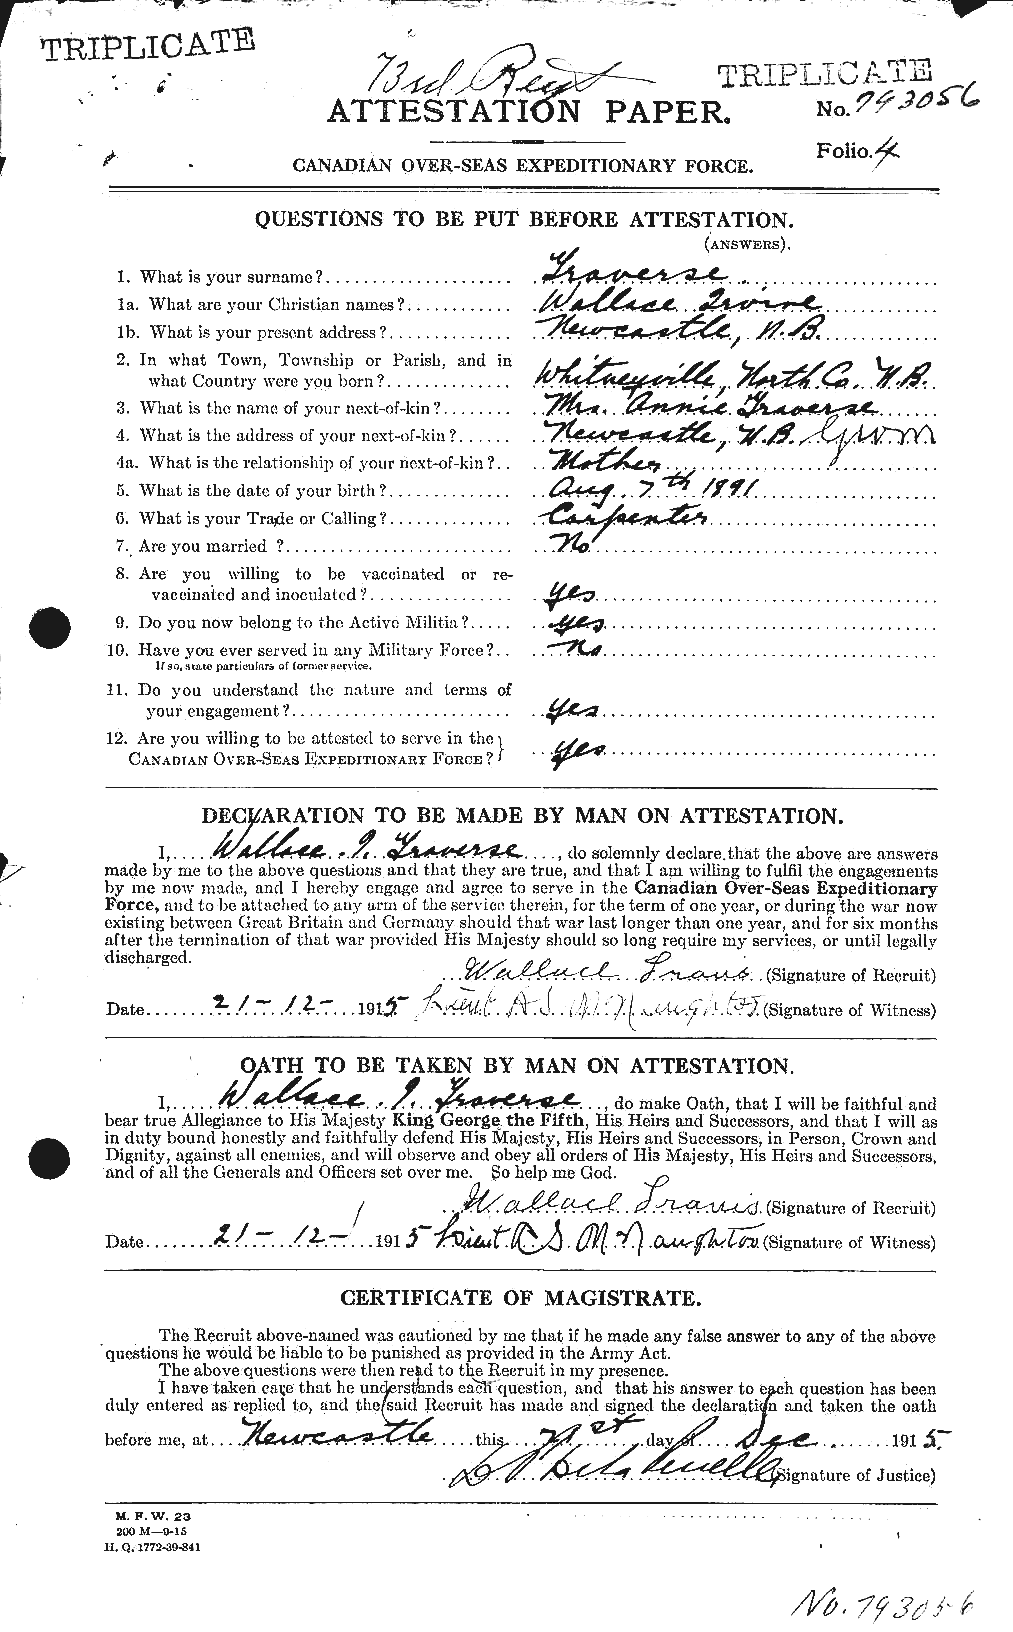 Personnel Records of the First World War - CEF 638743a